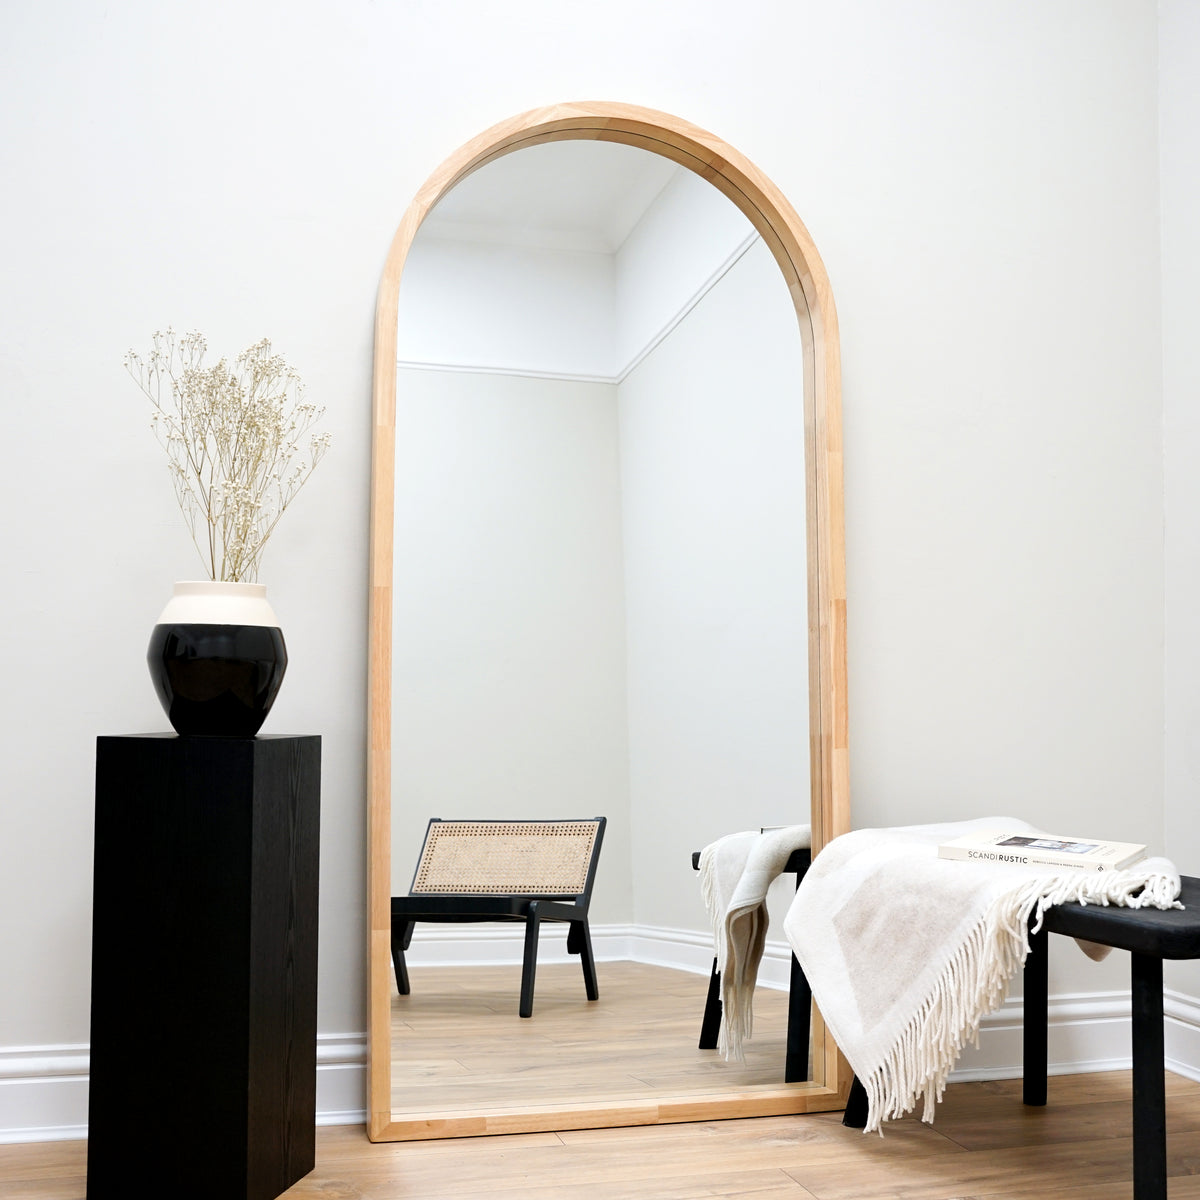 Natural Organic Full Length Wooden Arched Mirror 170cm x 80cm - Lilia